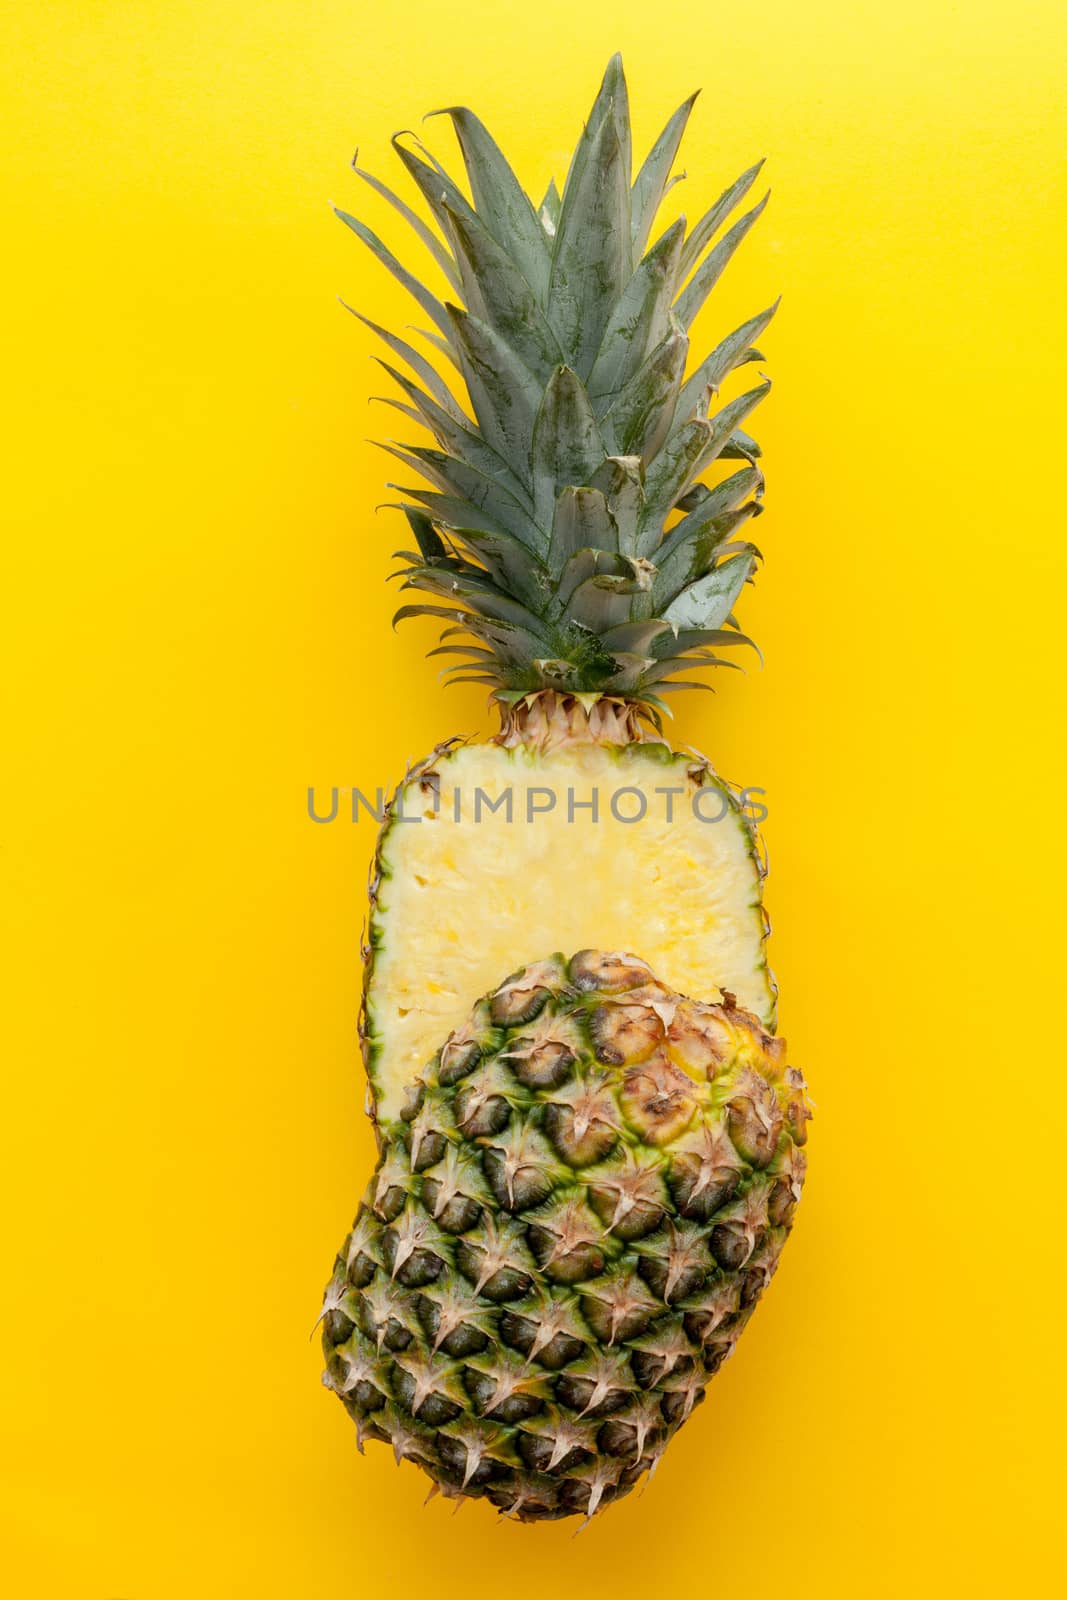 Pineapple on a solid yellow background by andongob